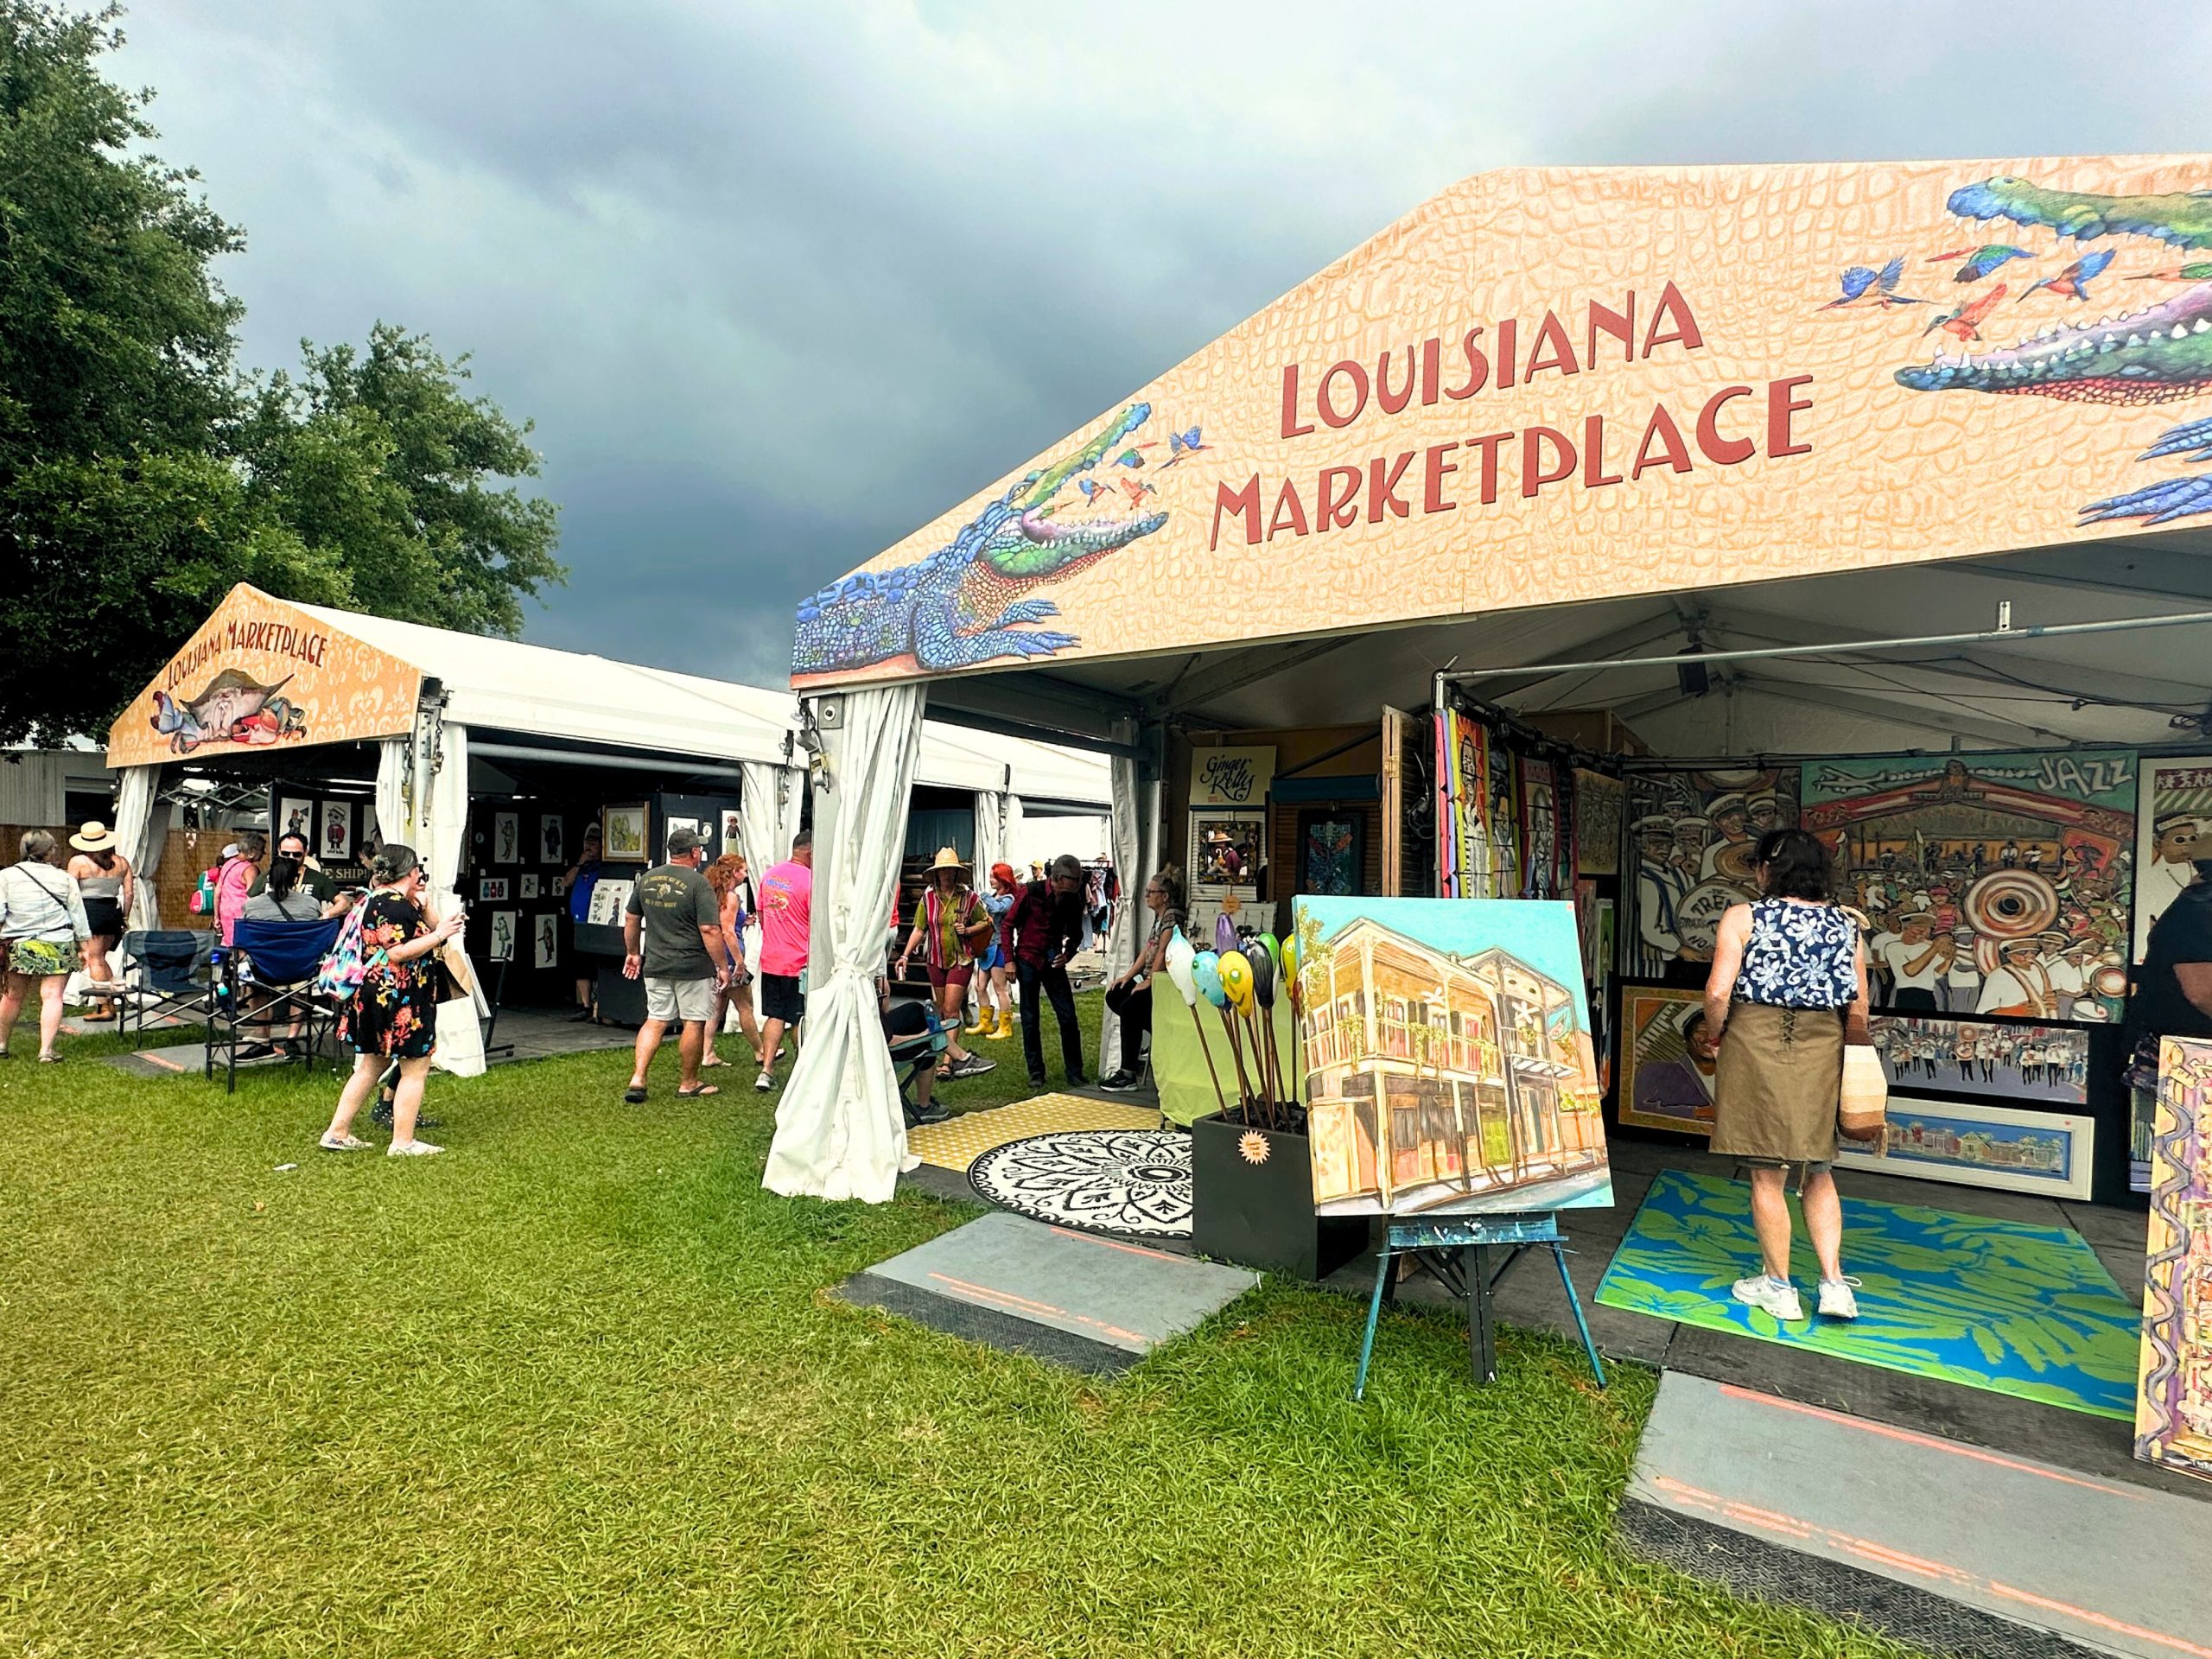 An image of the Louisiana Marketplace at the New Orleans Jazz and Heritage Festival.